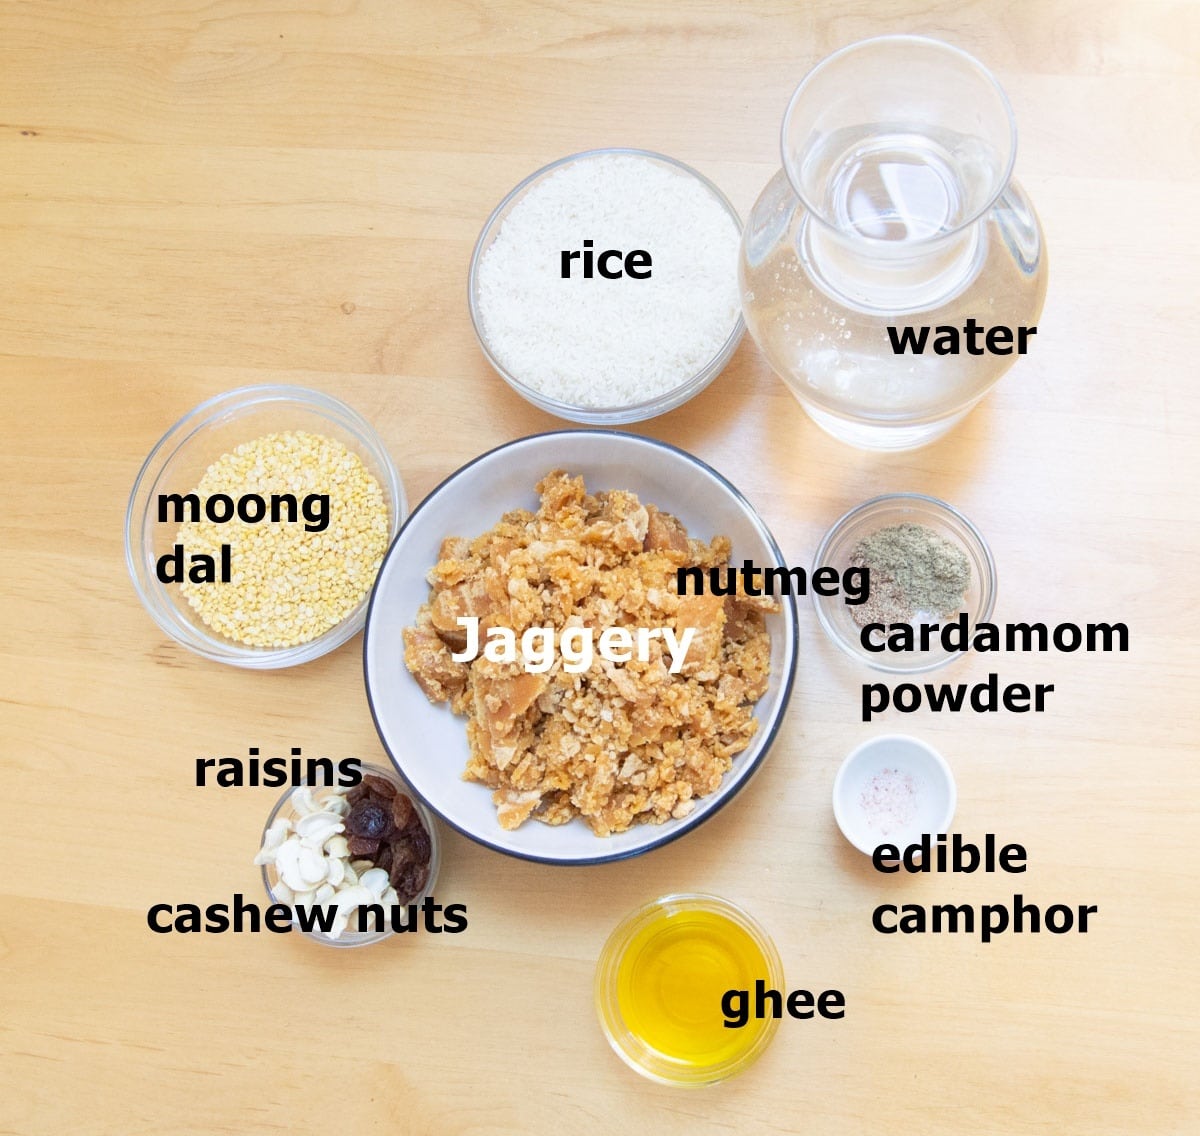 jaggery, rice, lentils, water, camphor, ghee, cardamom, cashews and raisins placed on a wooden table.